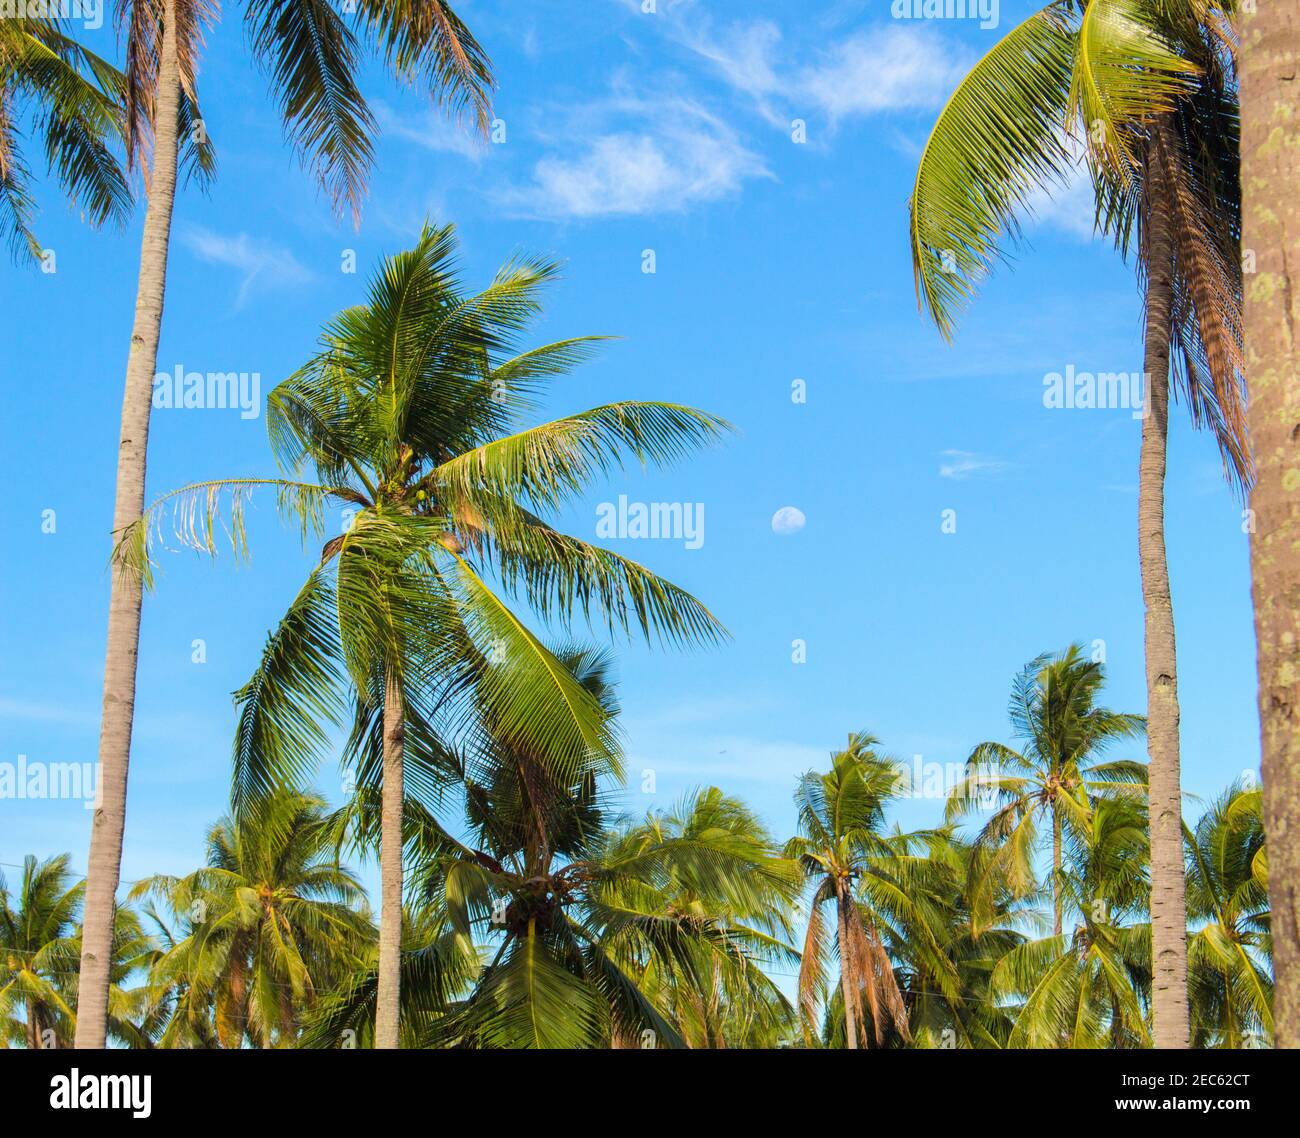 Paradise landscape with coco palm trees. Exotic place view through palm ...